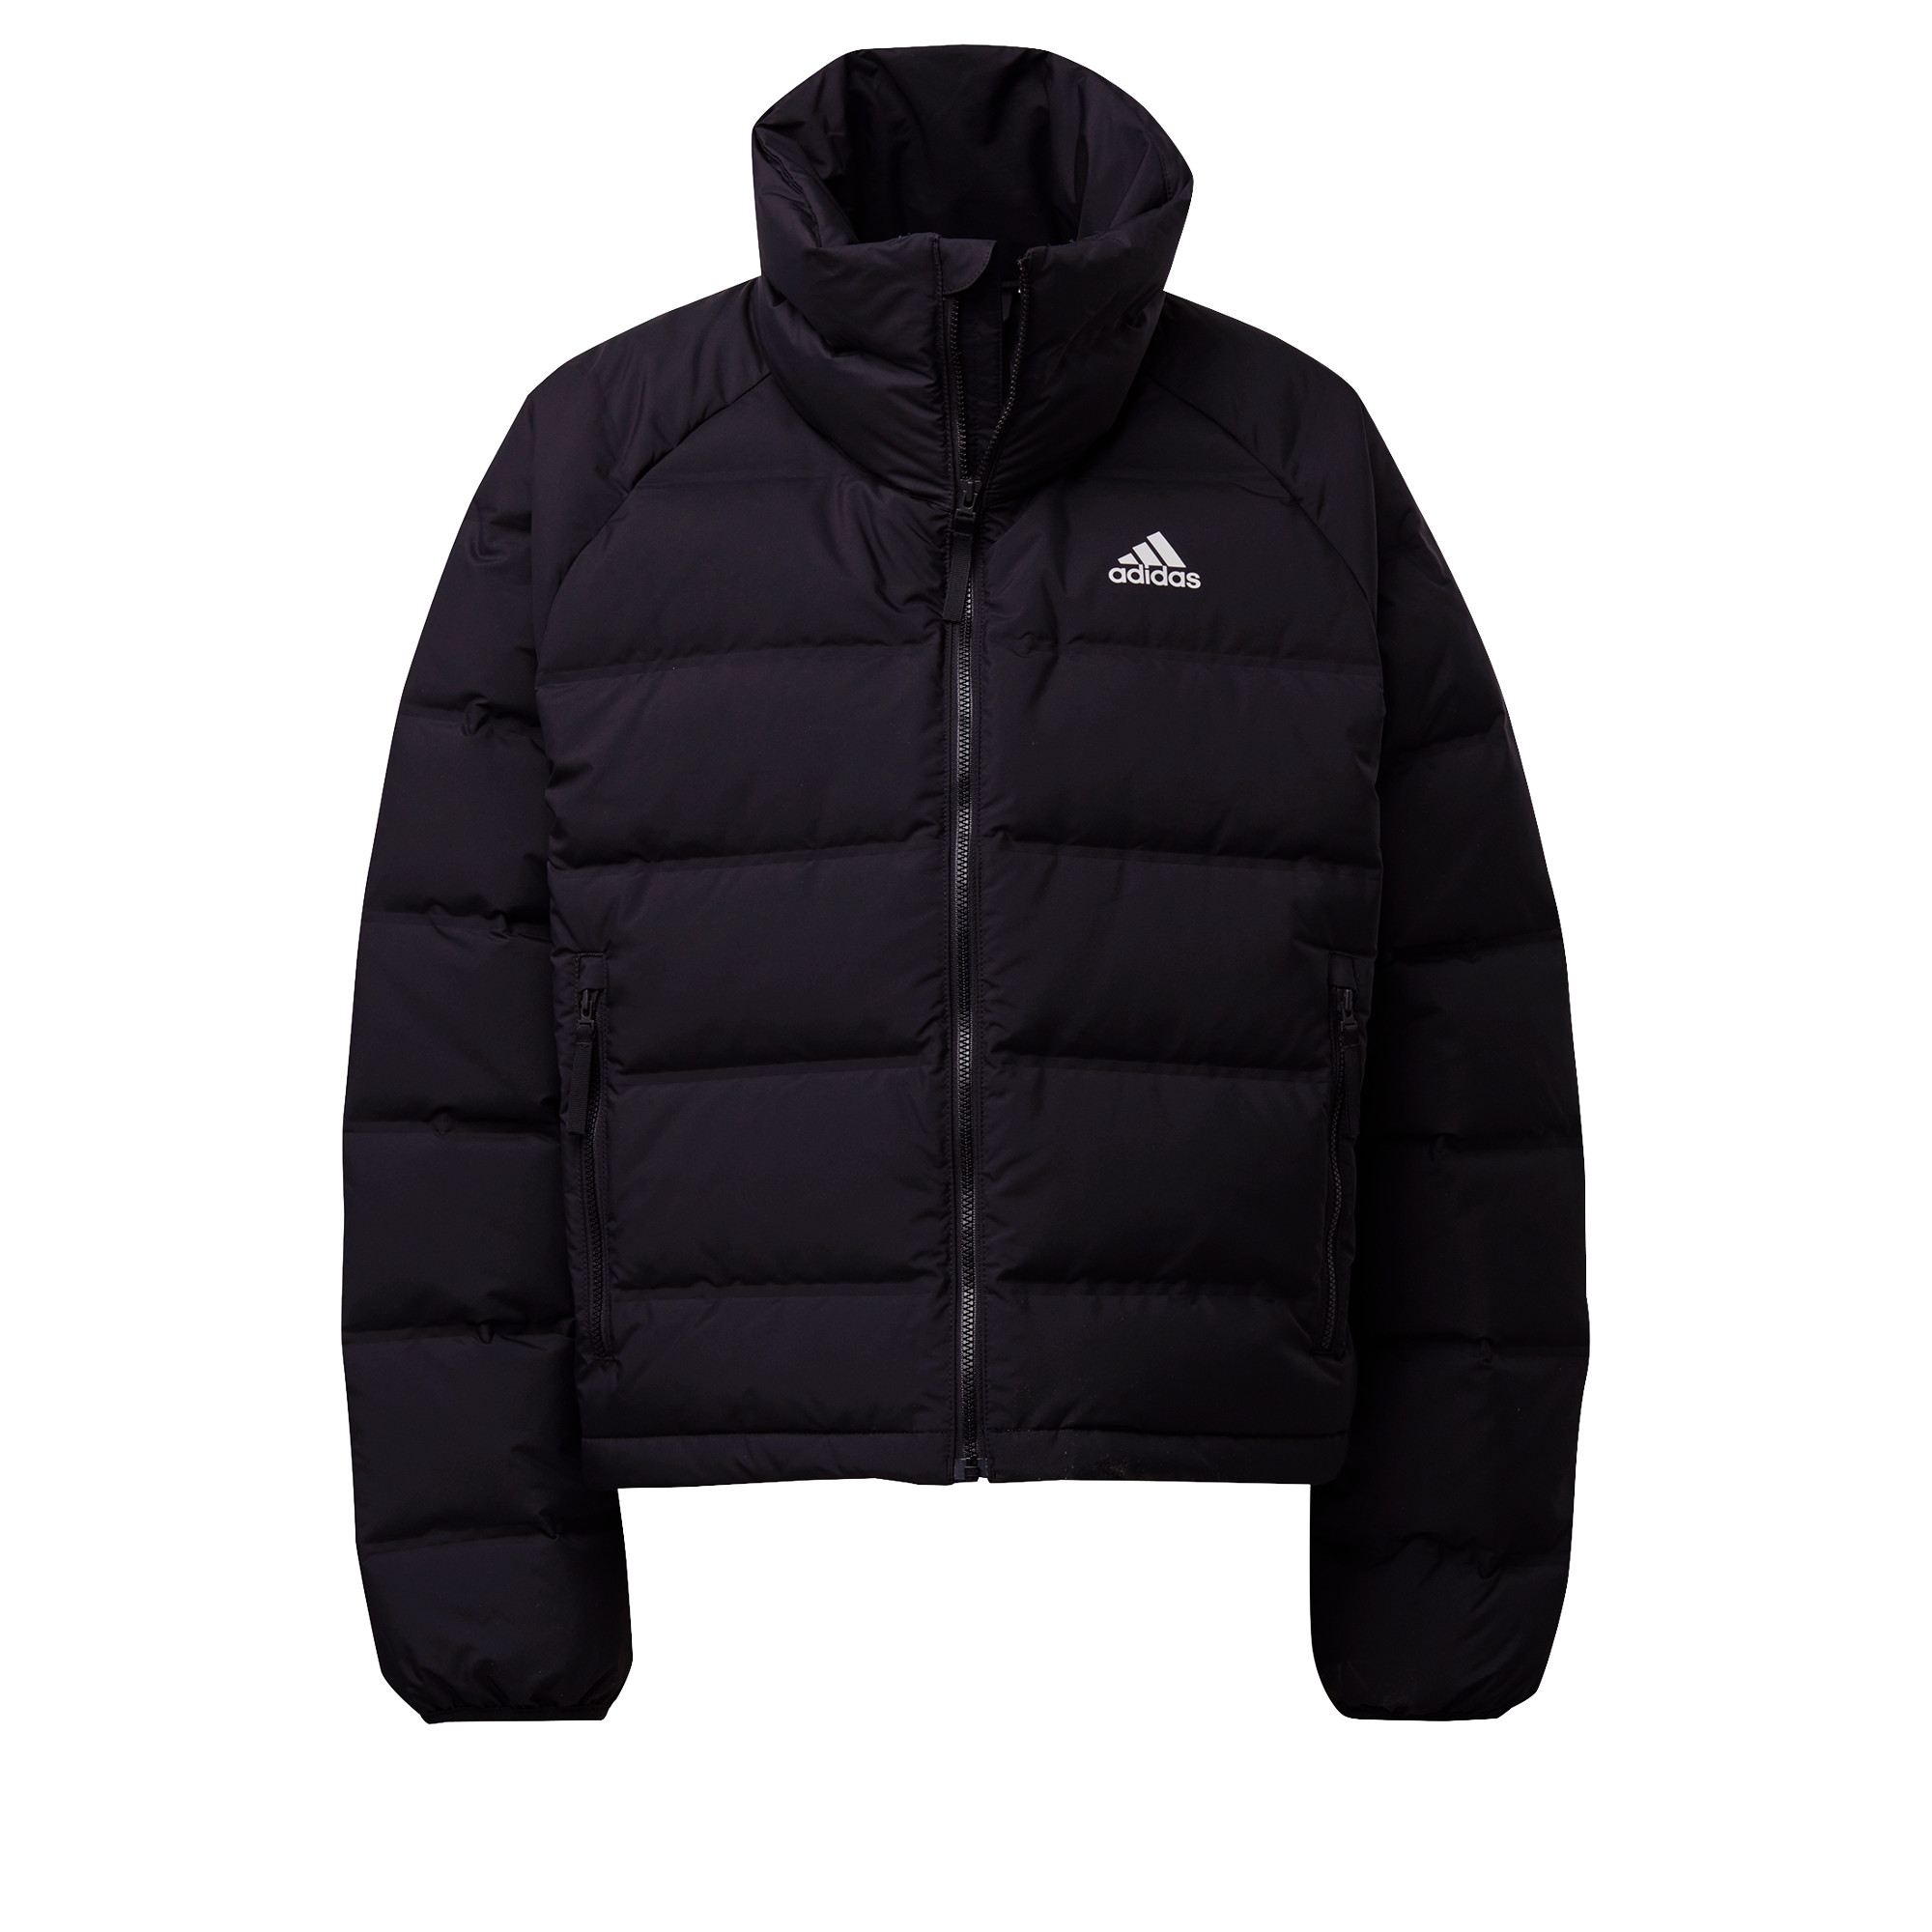 Adidas Women’s Helionic Relaxed Fit Down Jacket BLACK